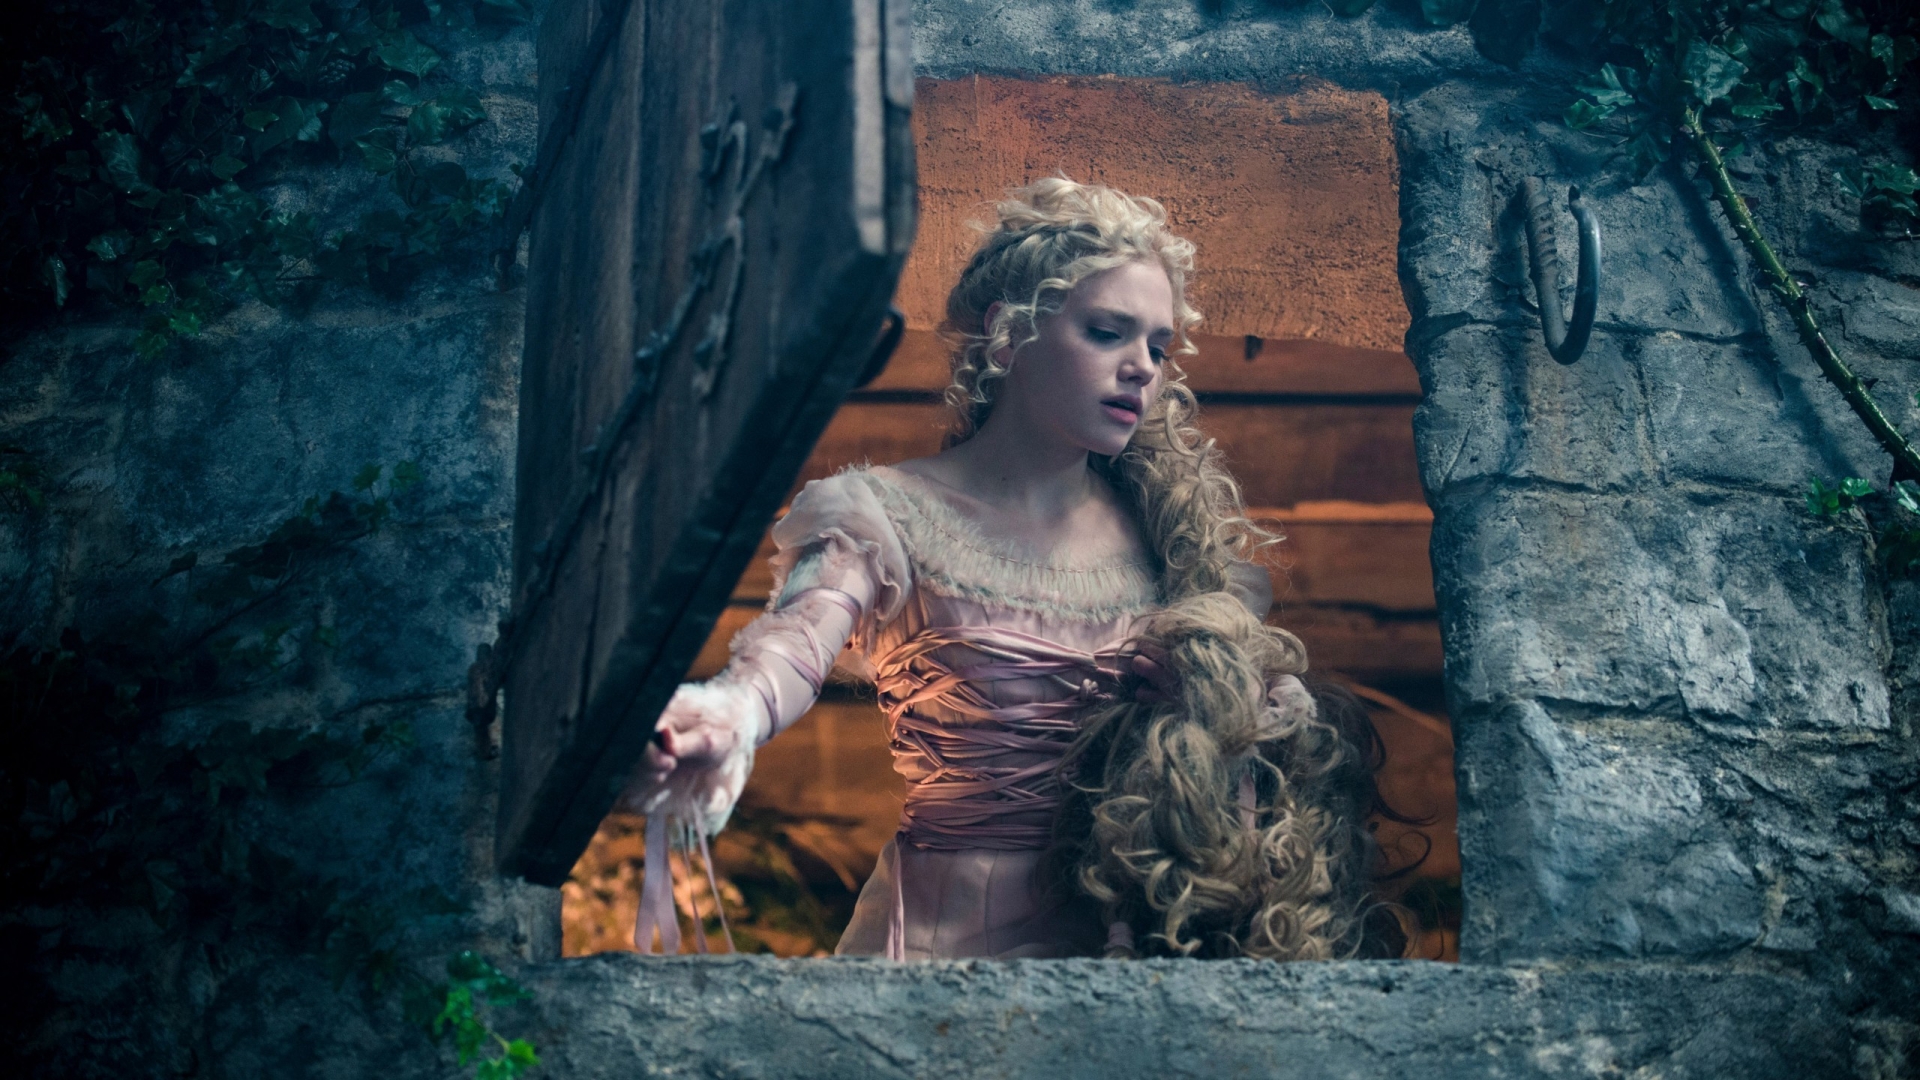 Into the Woods Rapunzel for 1920 x 1080 HDTV 1080p resolution